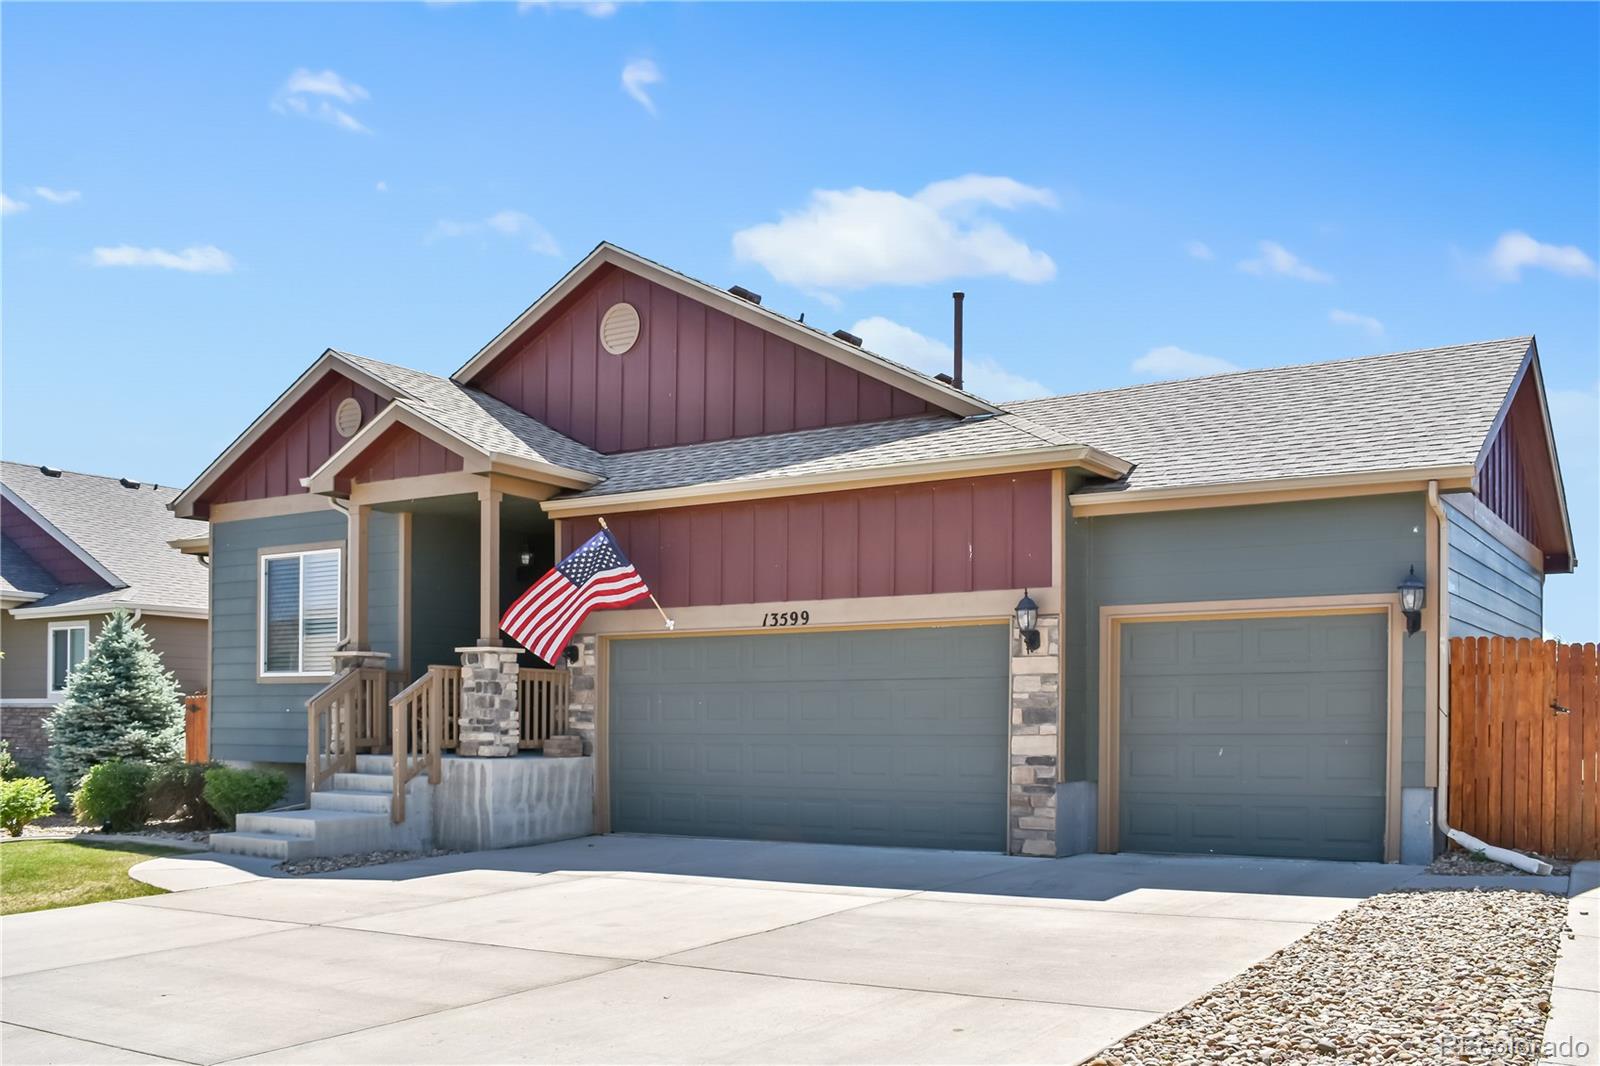 CMA Image for 13599  Mustang Drive,Mead, Colorado